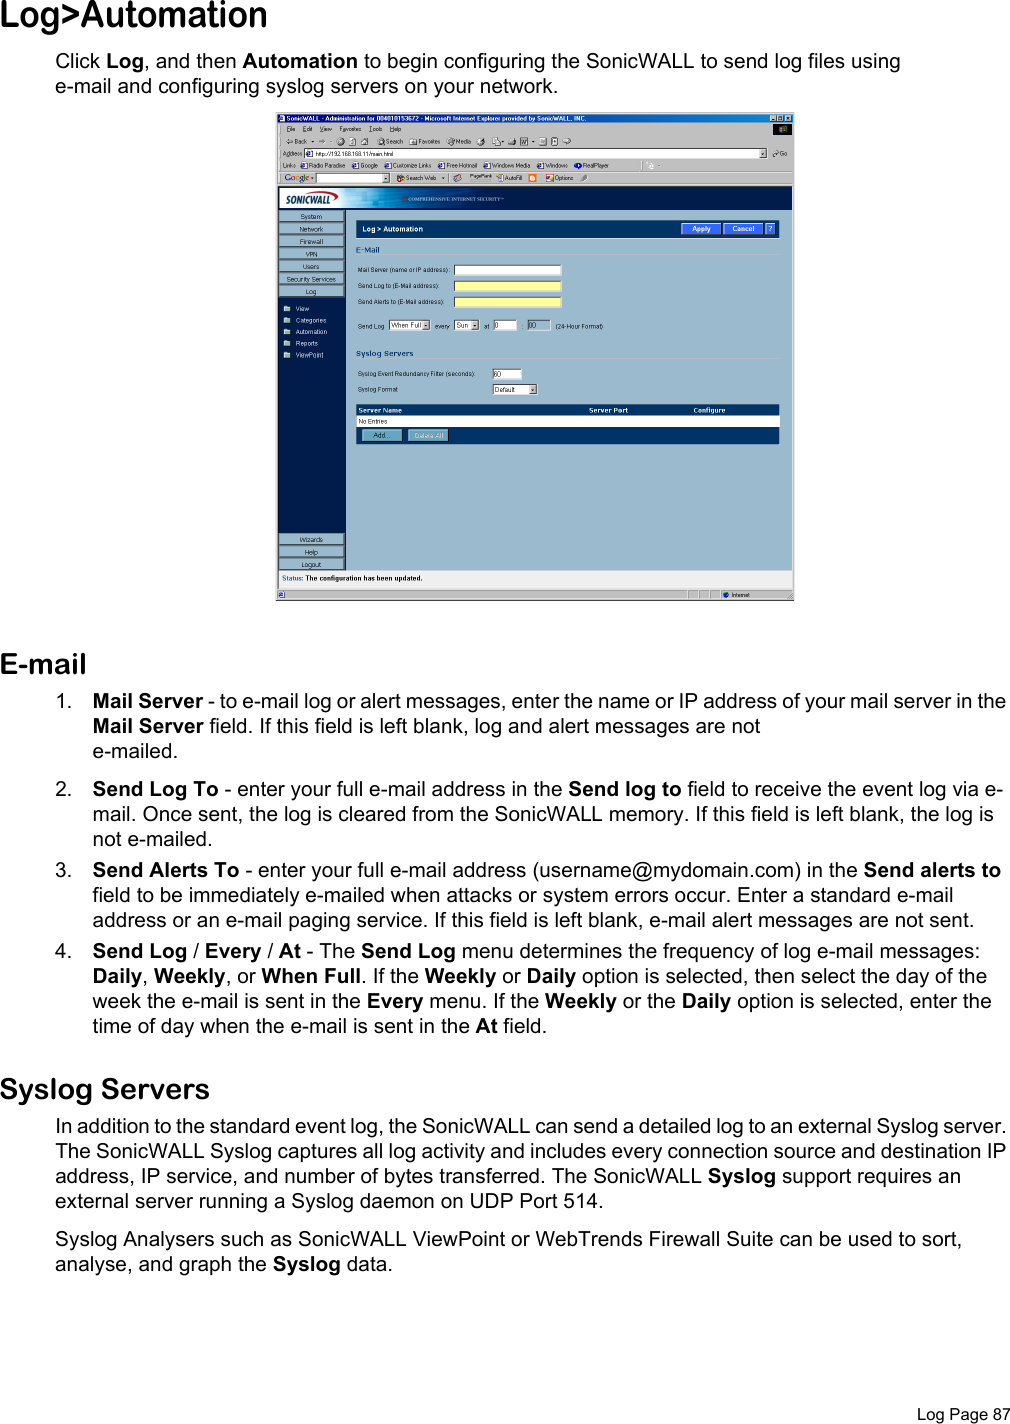  Log Page 87Log&gt;AutomationClick Log, and then Automation to begin configuring the SonicWALL to send log files using e-mail and configuring syslog servers on your network. E-mail1. Mail Server - to e-mail log or alert messages, enter the name or IP address of your mail server in the Mail Server field. If this field is left blank, log and alert messages are not e-mailed.2. Send Log To - enter your full e-mail address in the Send log to field to receive the event log via e-mail. Once sent, the log is cleared from the SonicWALL memory. If this field is left blank, the log is not e-mailed. 3. Send Alerts To - enter your full e-mail address (username@mydomain.com) in the Send alerts to field to be immediately e-mailed when attacks or system errors occur. Enter a standard e-mail address or an e-mail paging service. If this field is left blank, e-mail alert messages are not sent.4. Send Log / Every / At - The Send Log menu determines the frequency of log e-mail messages: Daily, Weekly, or When Full. If the Weekly or Daily option is selected, then select the day of the week the e-mail is sent in the Every menu. If the Weekly or the Daily option is selected, enter the time of day when the e-mail is sent in the At field. Syslog ServersIn addition to the standard event log, the SonicWALL can send a detailed log to an external Syslog server. The SonicWALL Syslog captures all log activity and includes every connection source and destination IP address, IP service, and number of bytes transferred. The SonicWALL Syslog support requires an external server running a Syslog daemon on UDP Port 514.Syslog Analysers such as SonicWALL ViewPoint or WebTrends Firewall Suite can be used to sort, analyse, and graph the Syslog data.